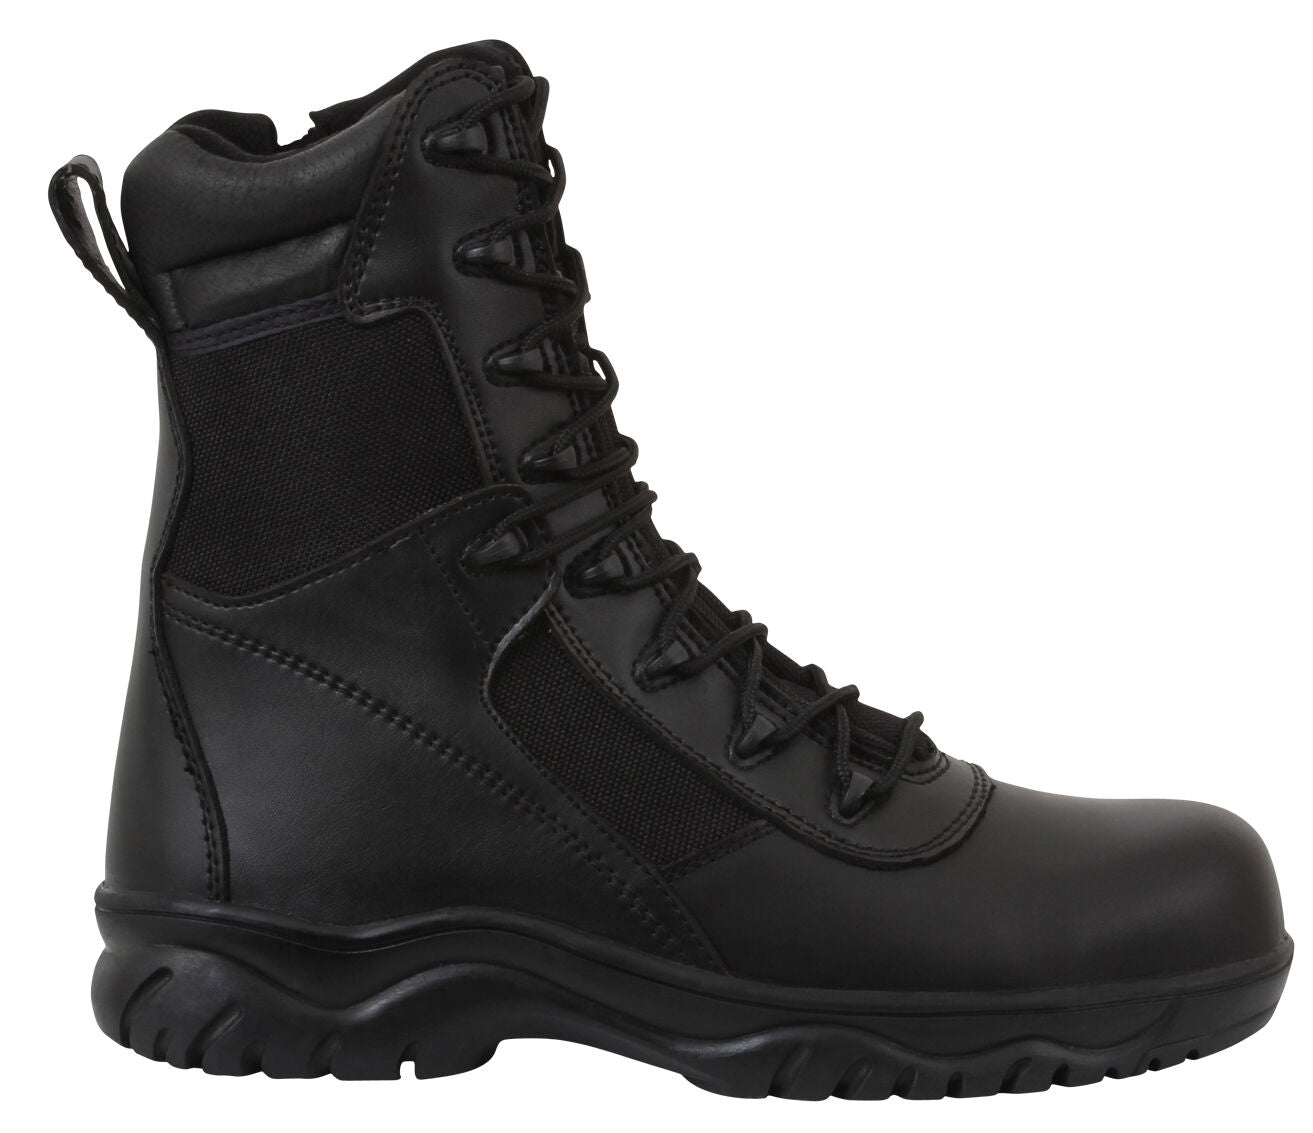 Rothco Forced Entry Tactical Boot With Side Zipper & Composite Toe - 8 Inch Black